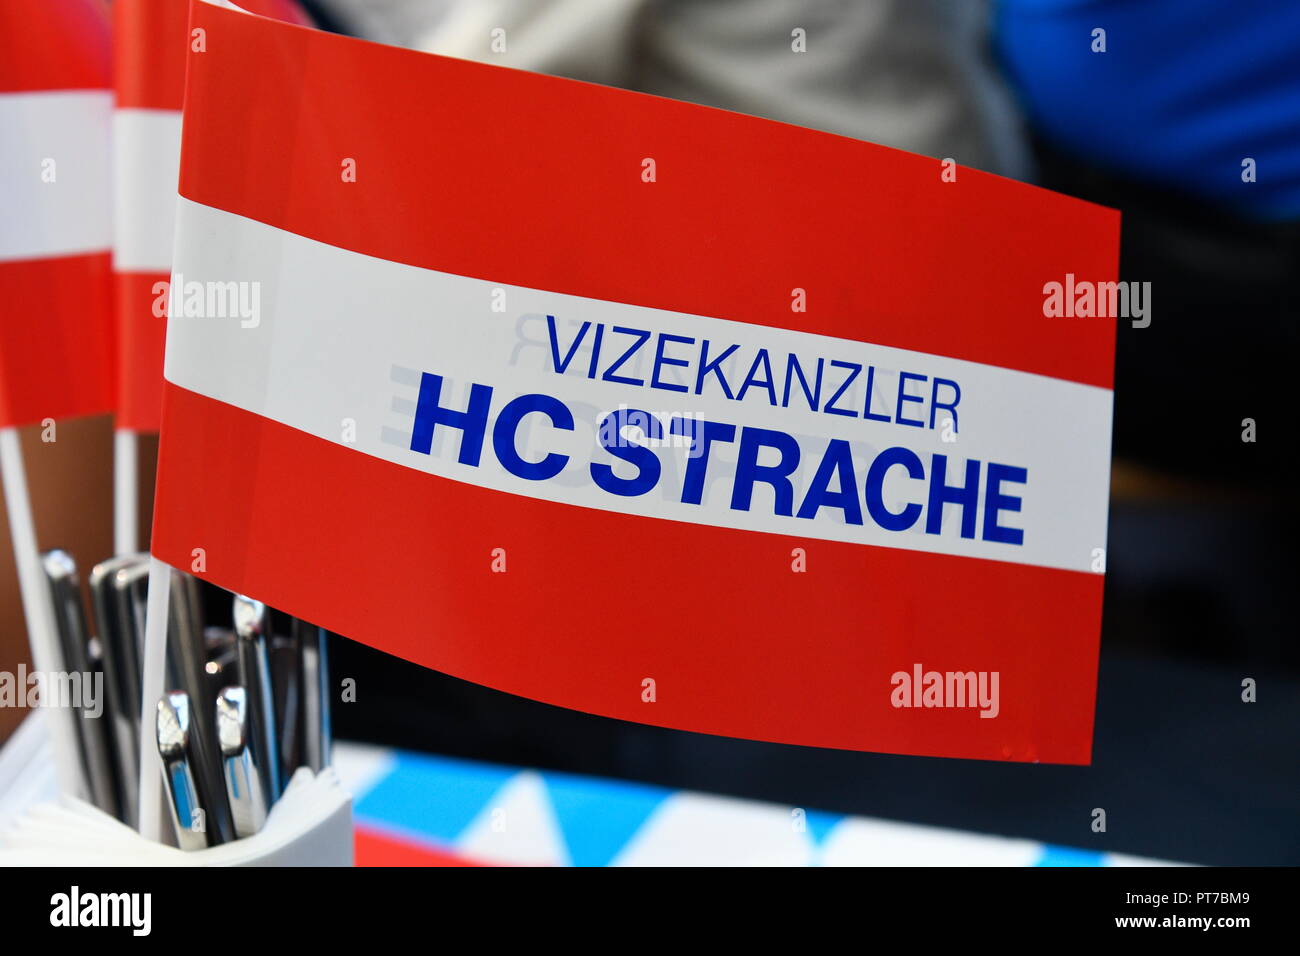 Vienna, Austria. October 7, 2018. Family celebration of the Austrian Vice-Chancellor Heinz Christian Strache FPÖ (Freedom Party Austria), as well as other liberal government members and mandataries. Picture shows Austrian flag with the inscription Vice-Chancellor Heinz Christian Strache. Credit: Franz Perc / Alamy Live News Stock Photo